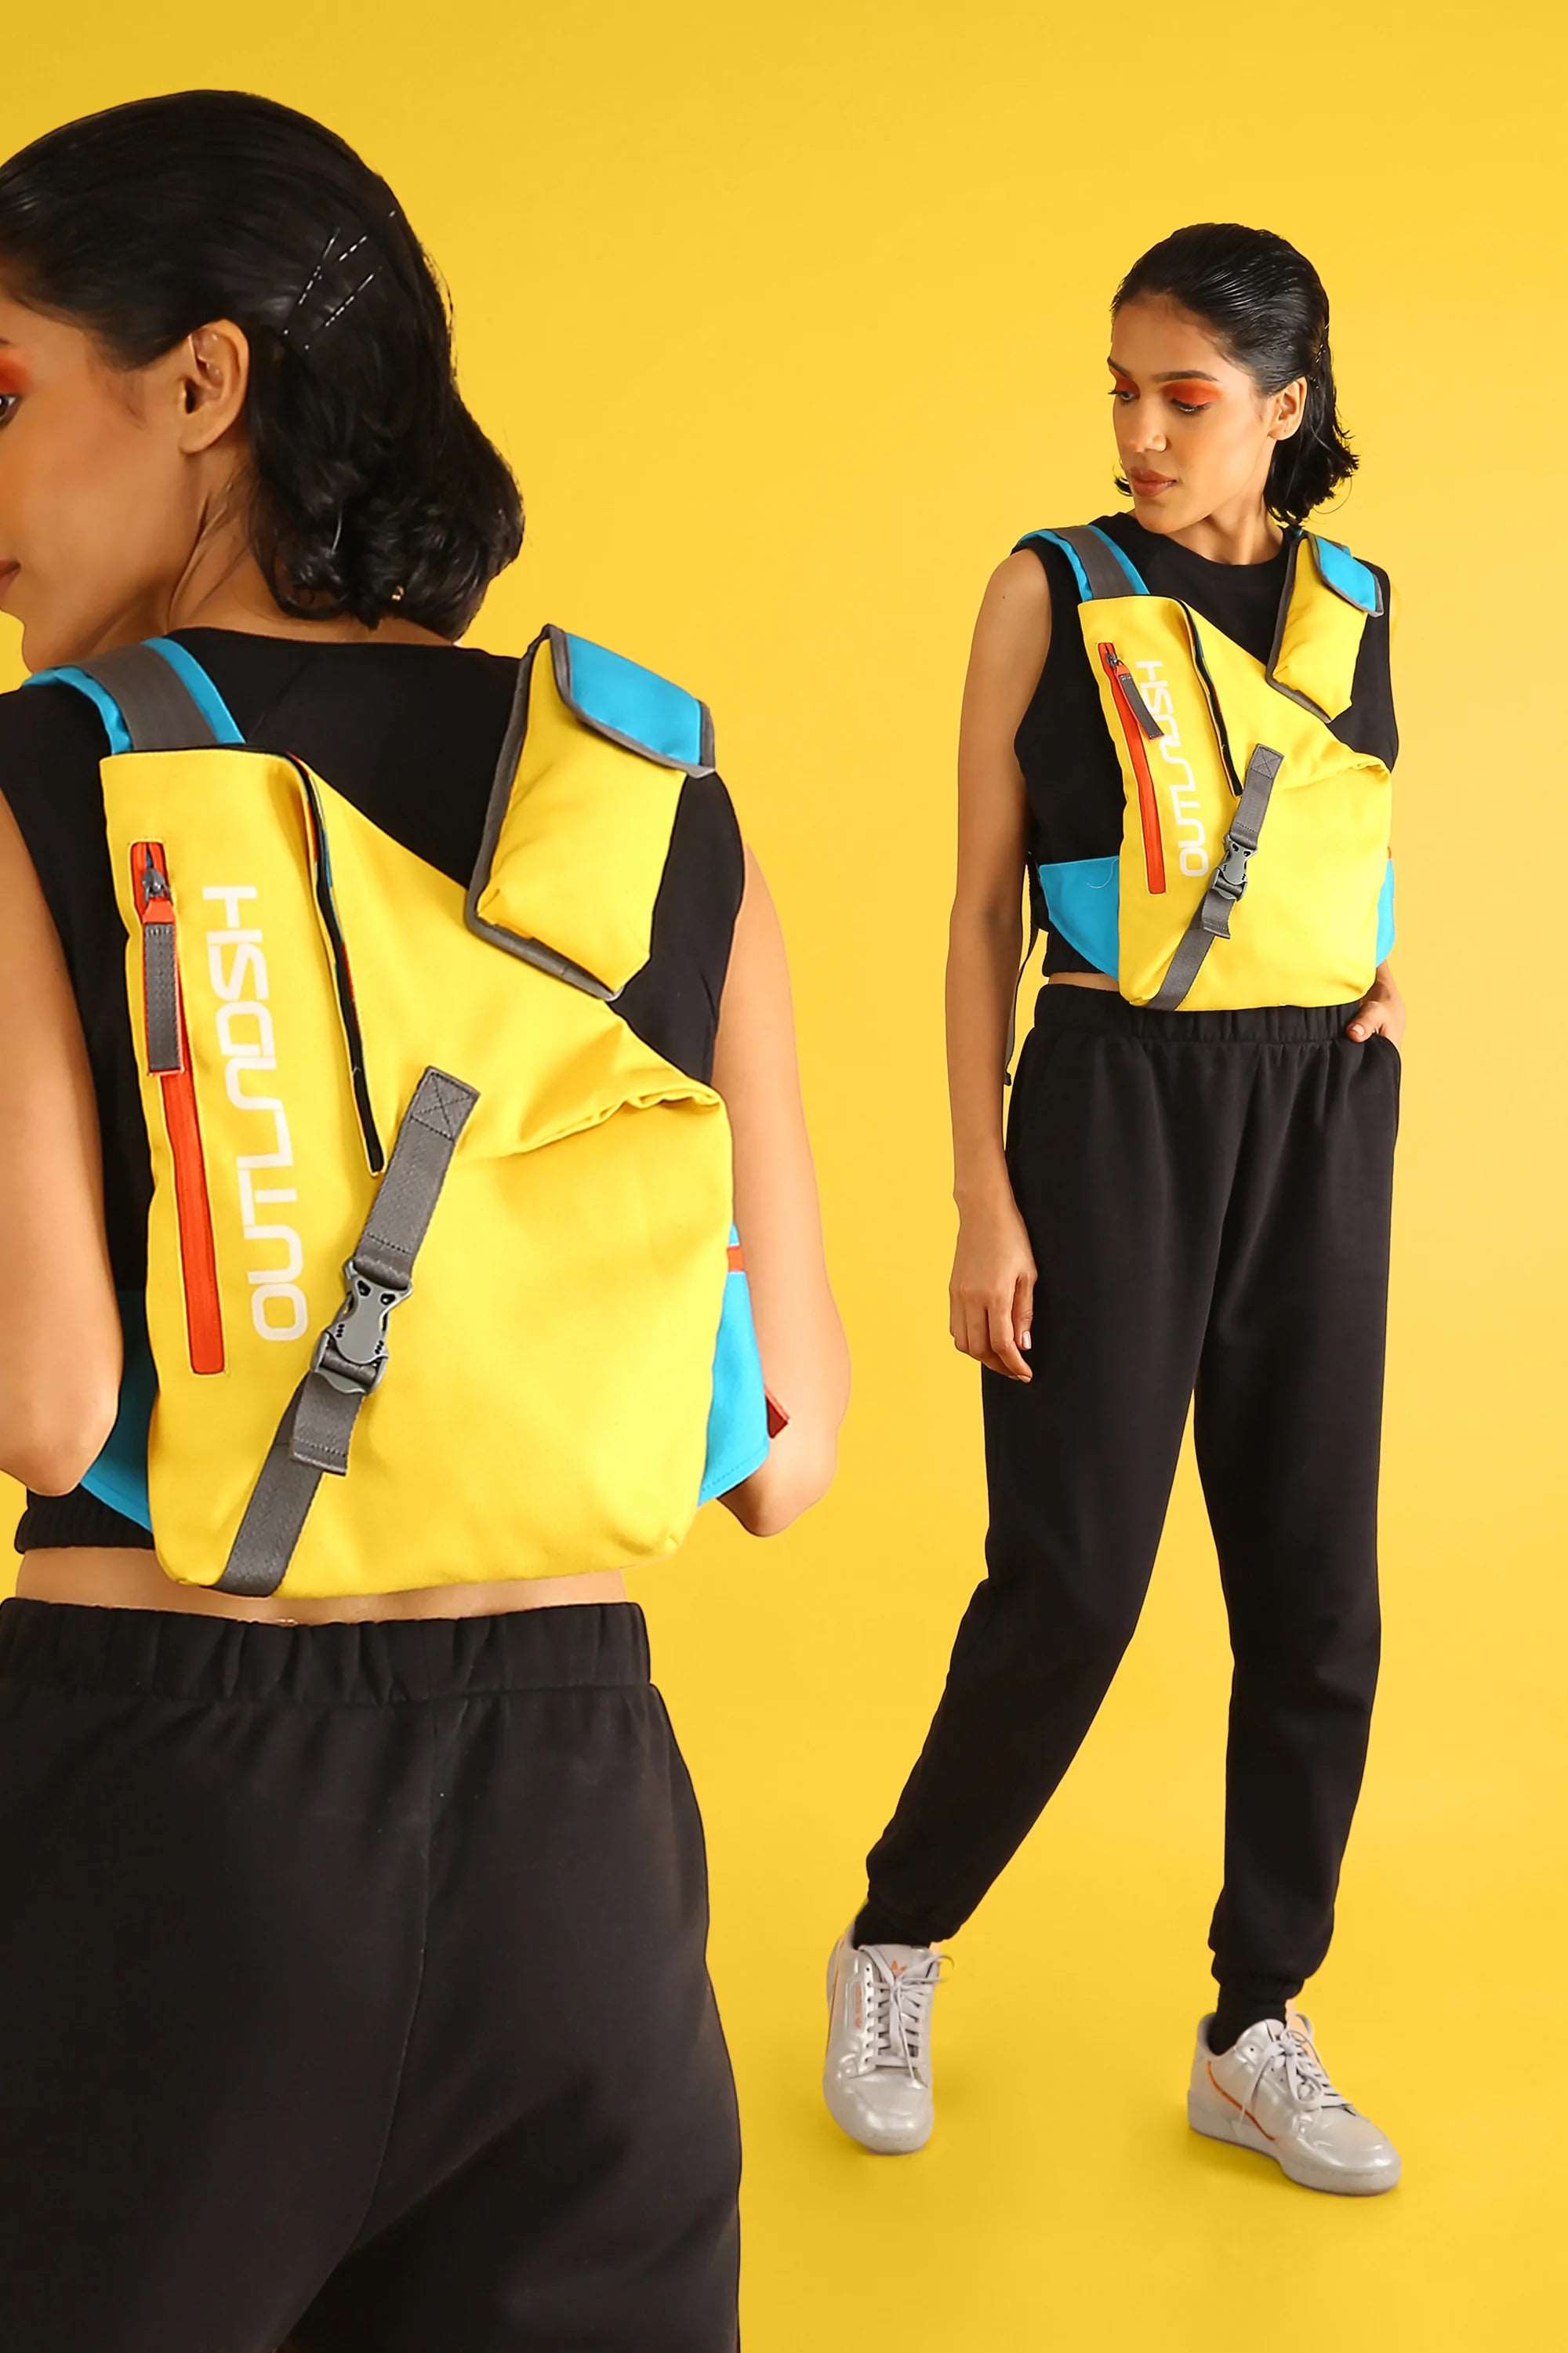 OUTLNDSH Backpack bag plus chest bag yellow color 